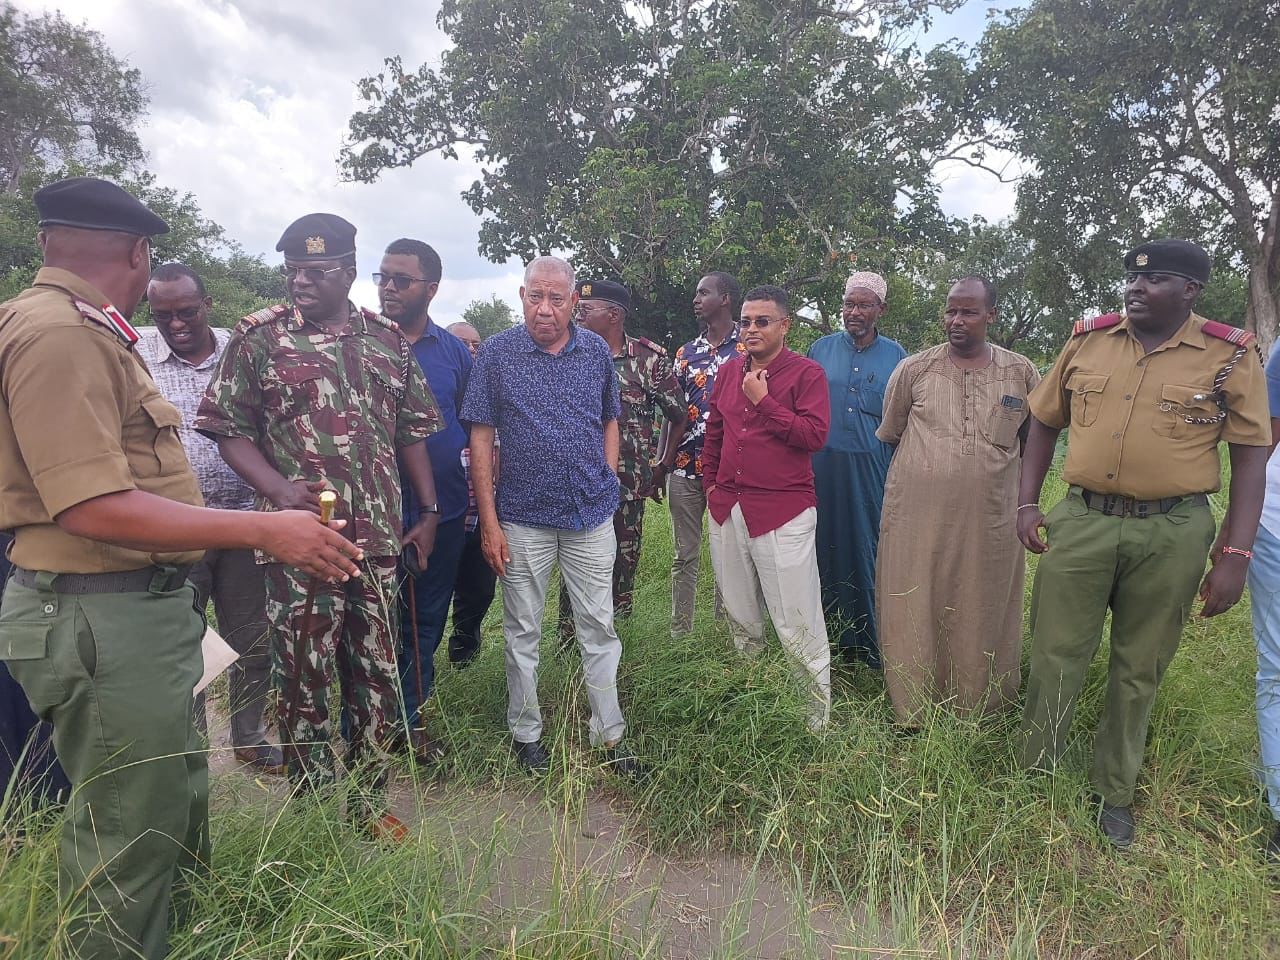 GOVERNOR TIMAMY VISITS ATTACKED COMMUNITY IN WITU, CALLS FOR CALM